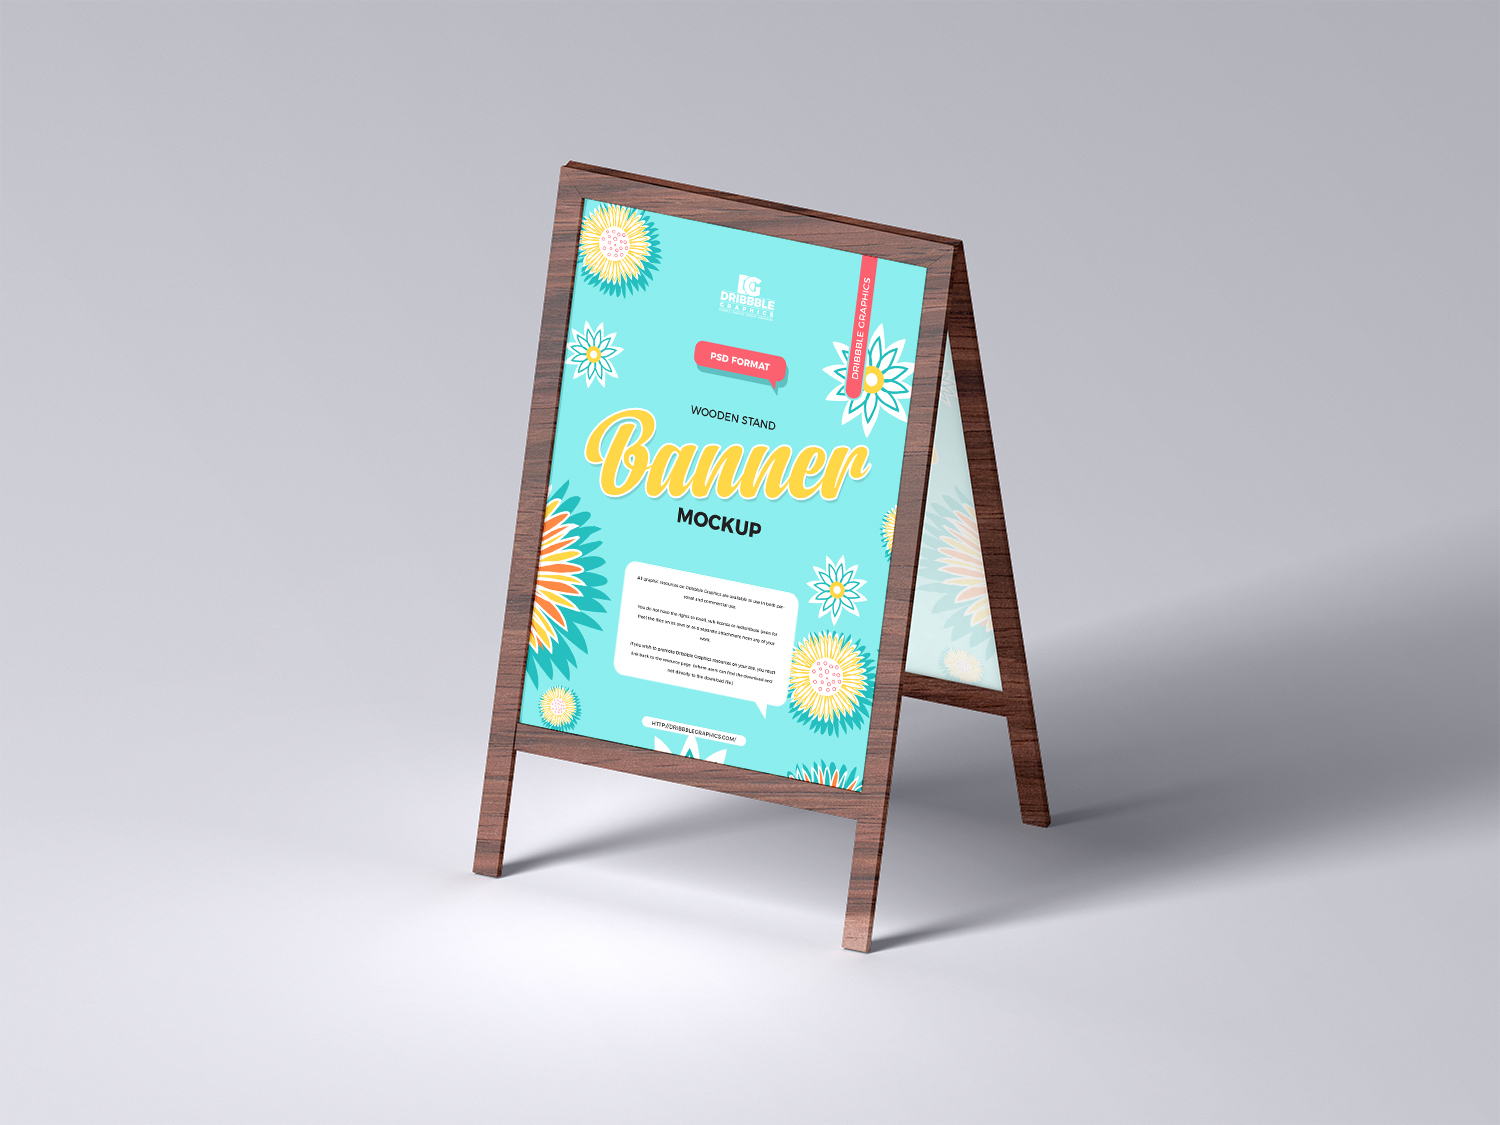 Wooden Stand Banner Mockup